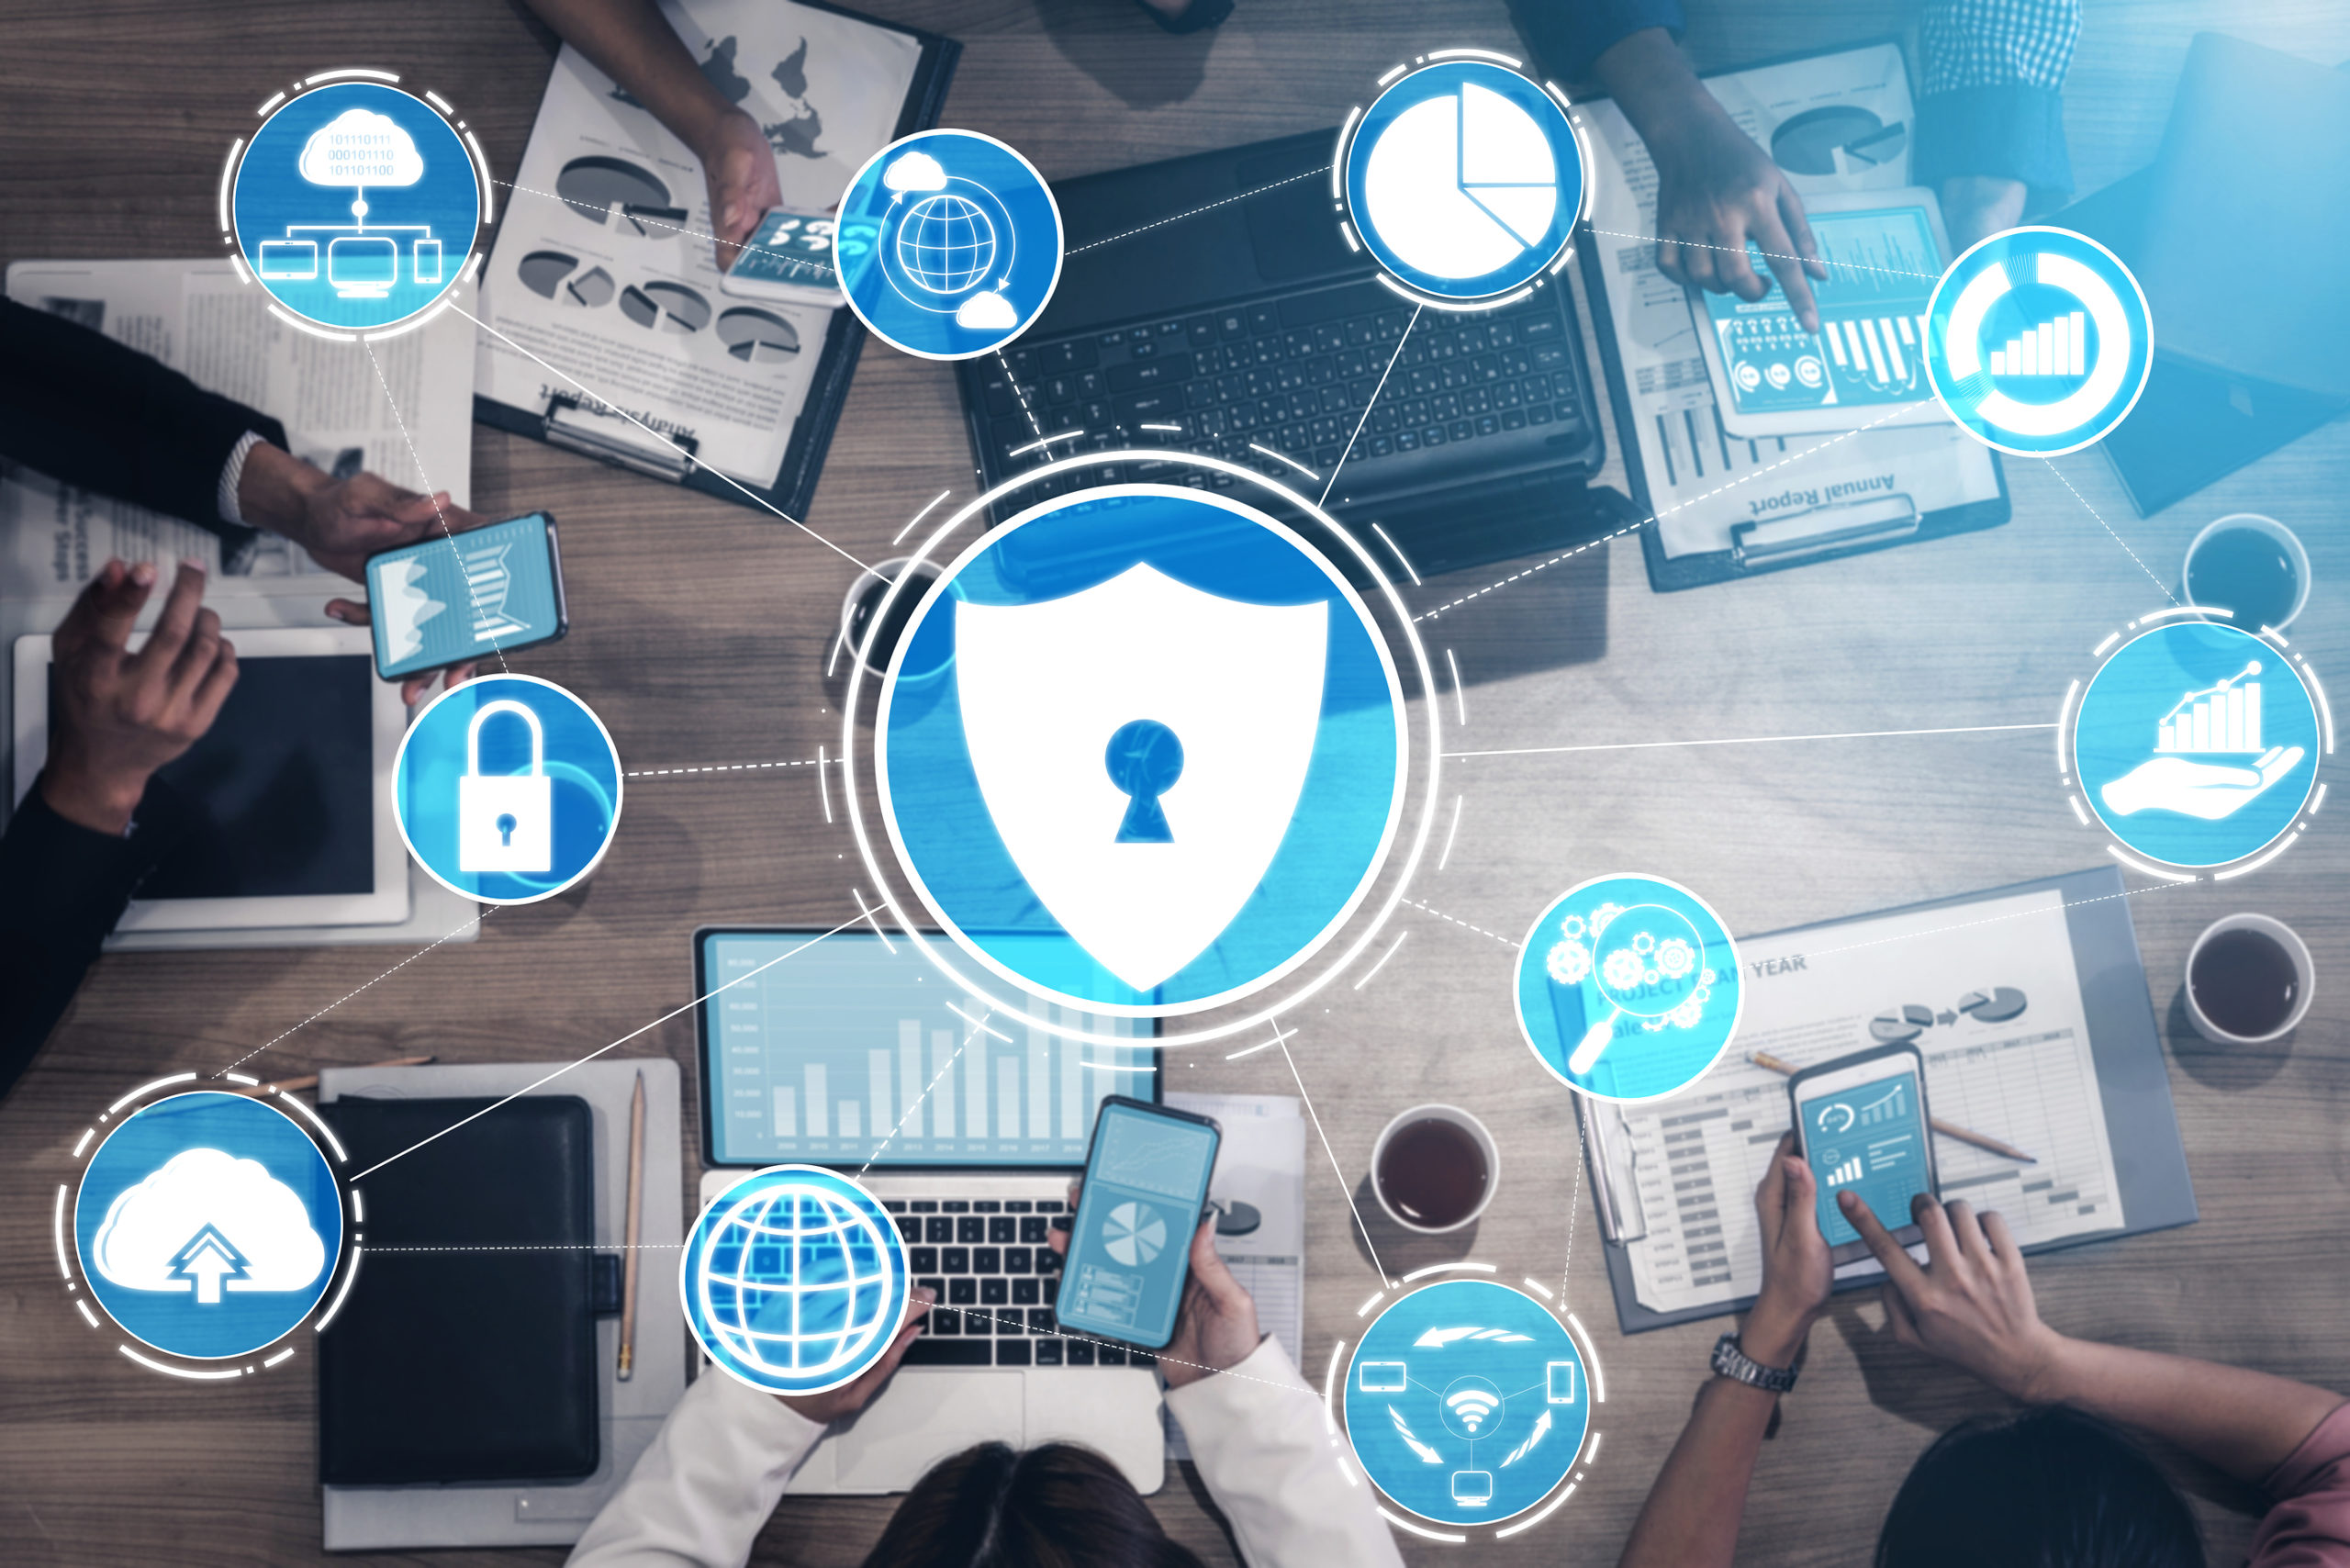 How You Can Use the NIST Cybersecurity Framework to Guide Your Business Security